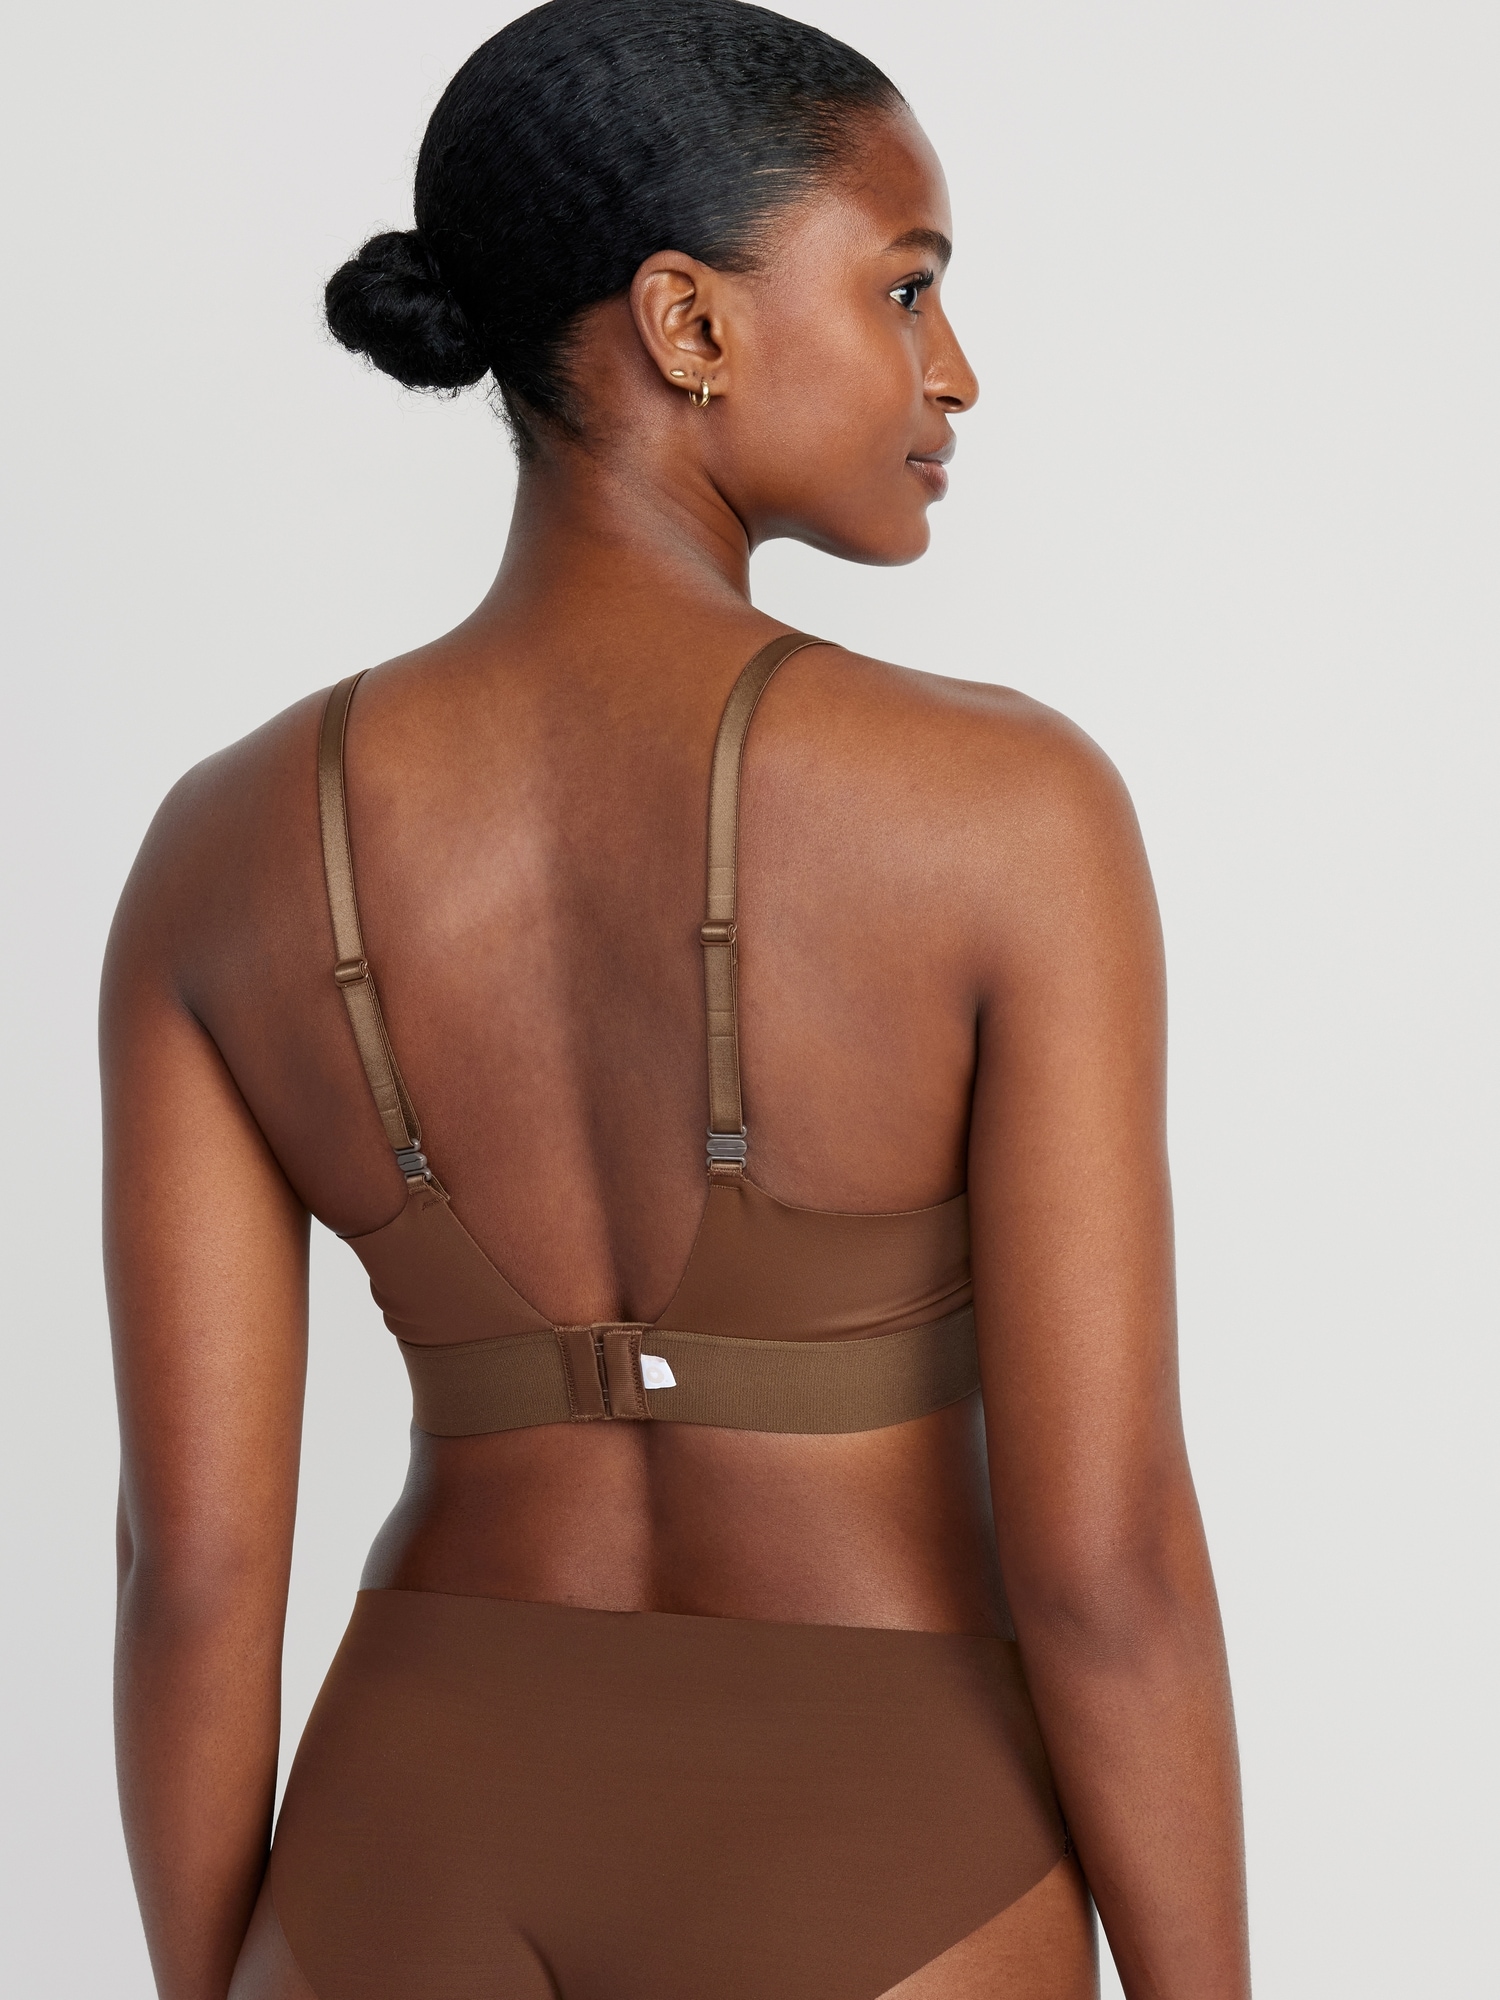 The Best Wireless Bras That Still Offer Great Support, 56% OFF